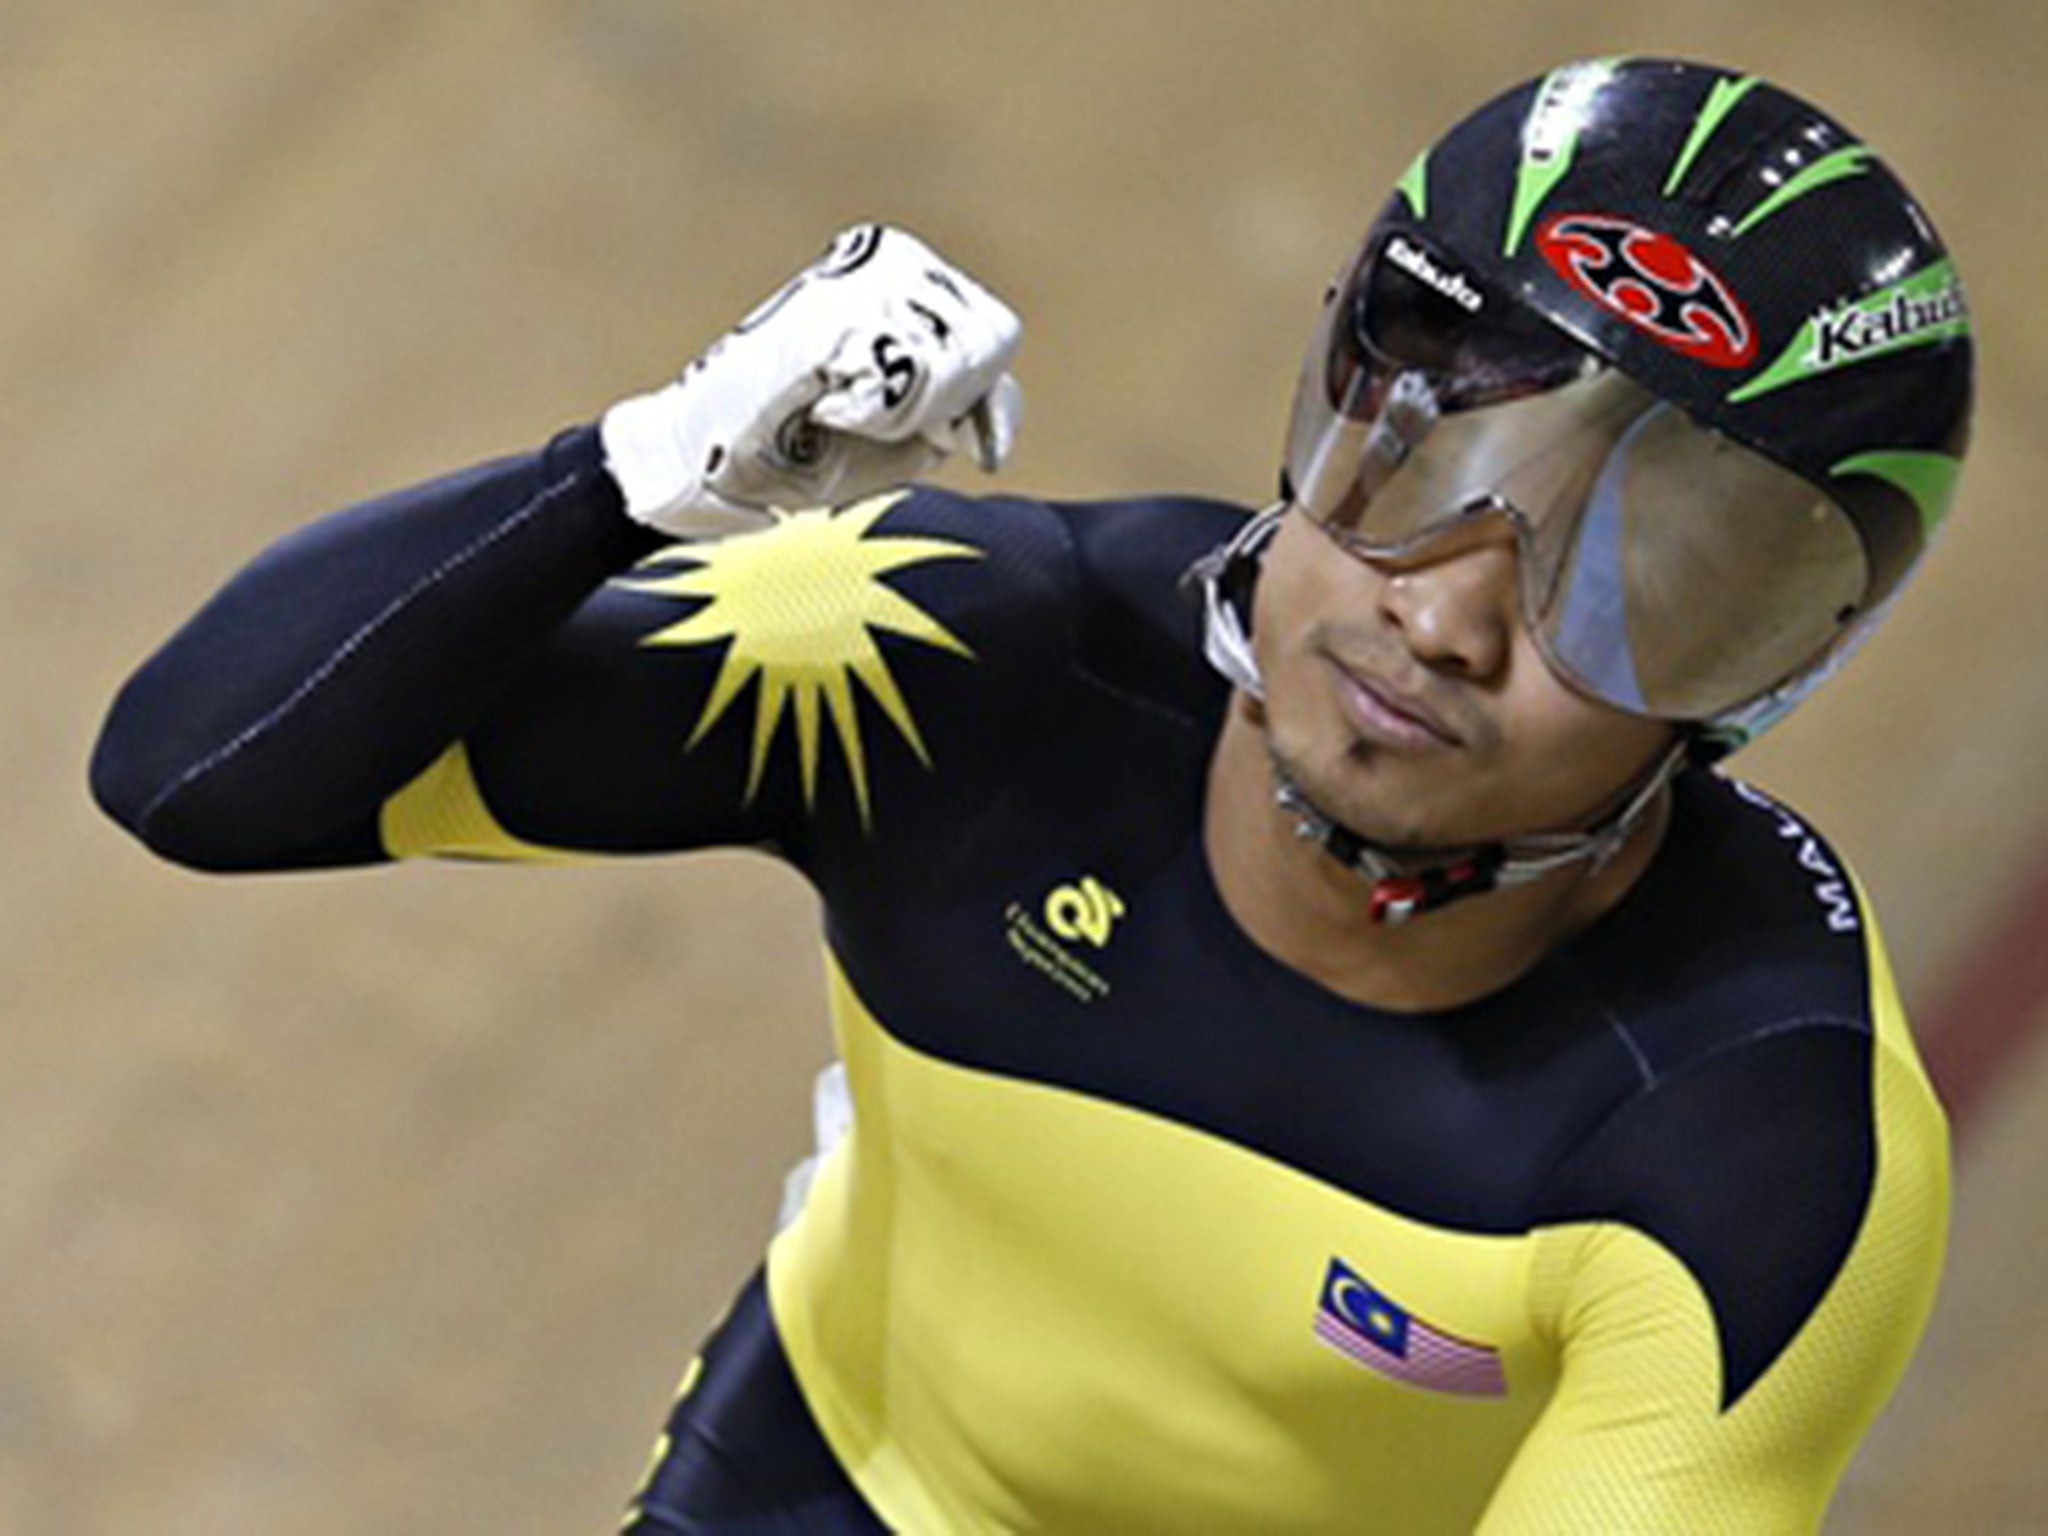 Awang is set to compete in the men's sprint quarter-final in Glasgow today